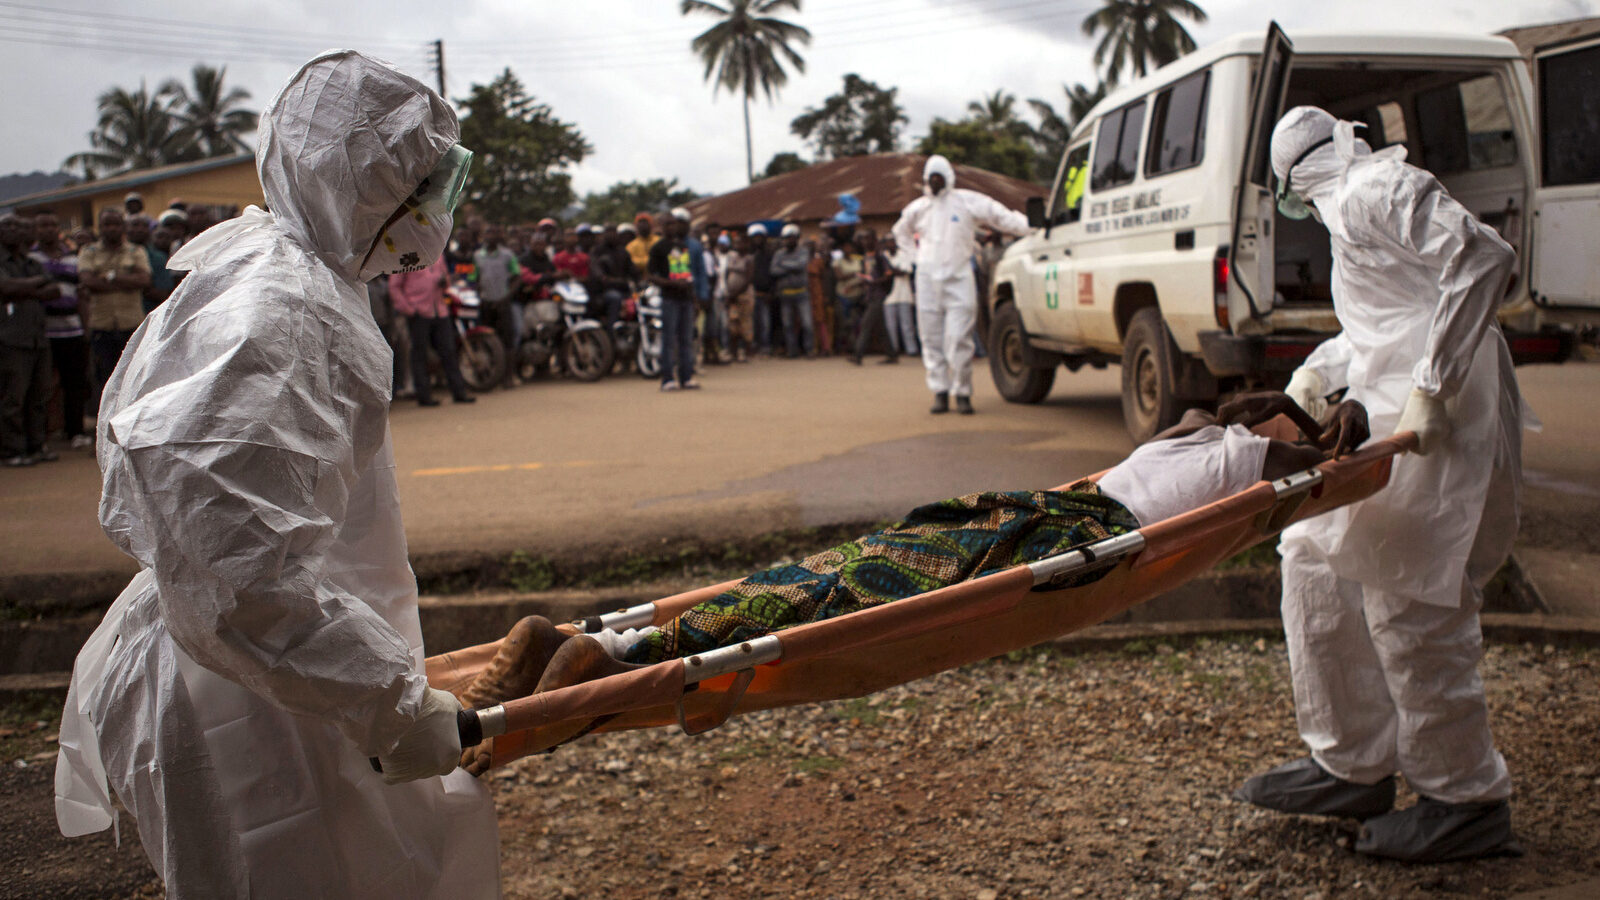 Healthcare workers load a man suspected of suffering from the Ebola virus onto an ambulance in Kenema, Sierra Leone. (AP Photo/Tanya Bindra)